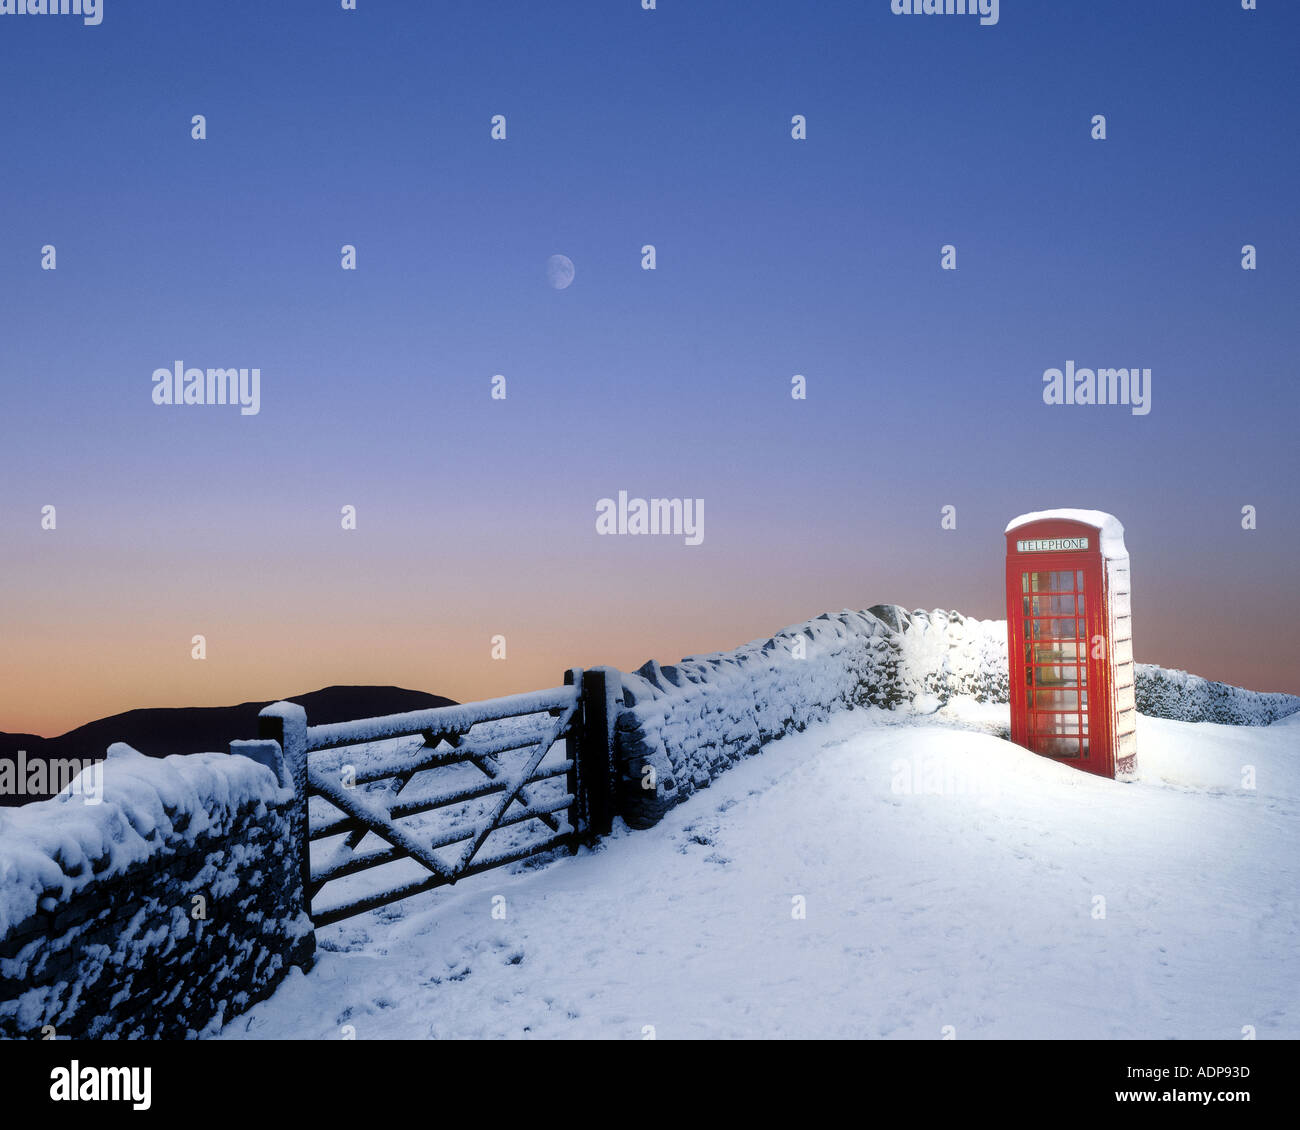 GB - GLOUCESTERSHIRE: Inverno in Cotswolds Foto Stock